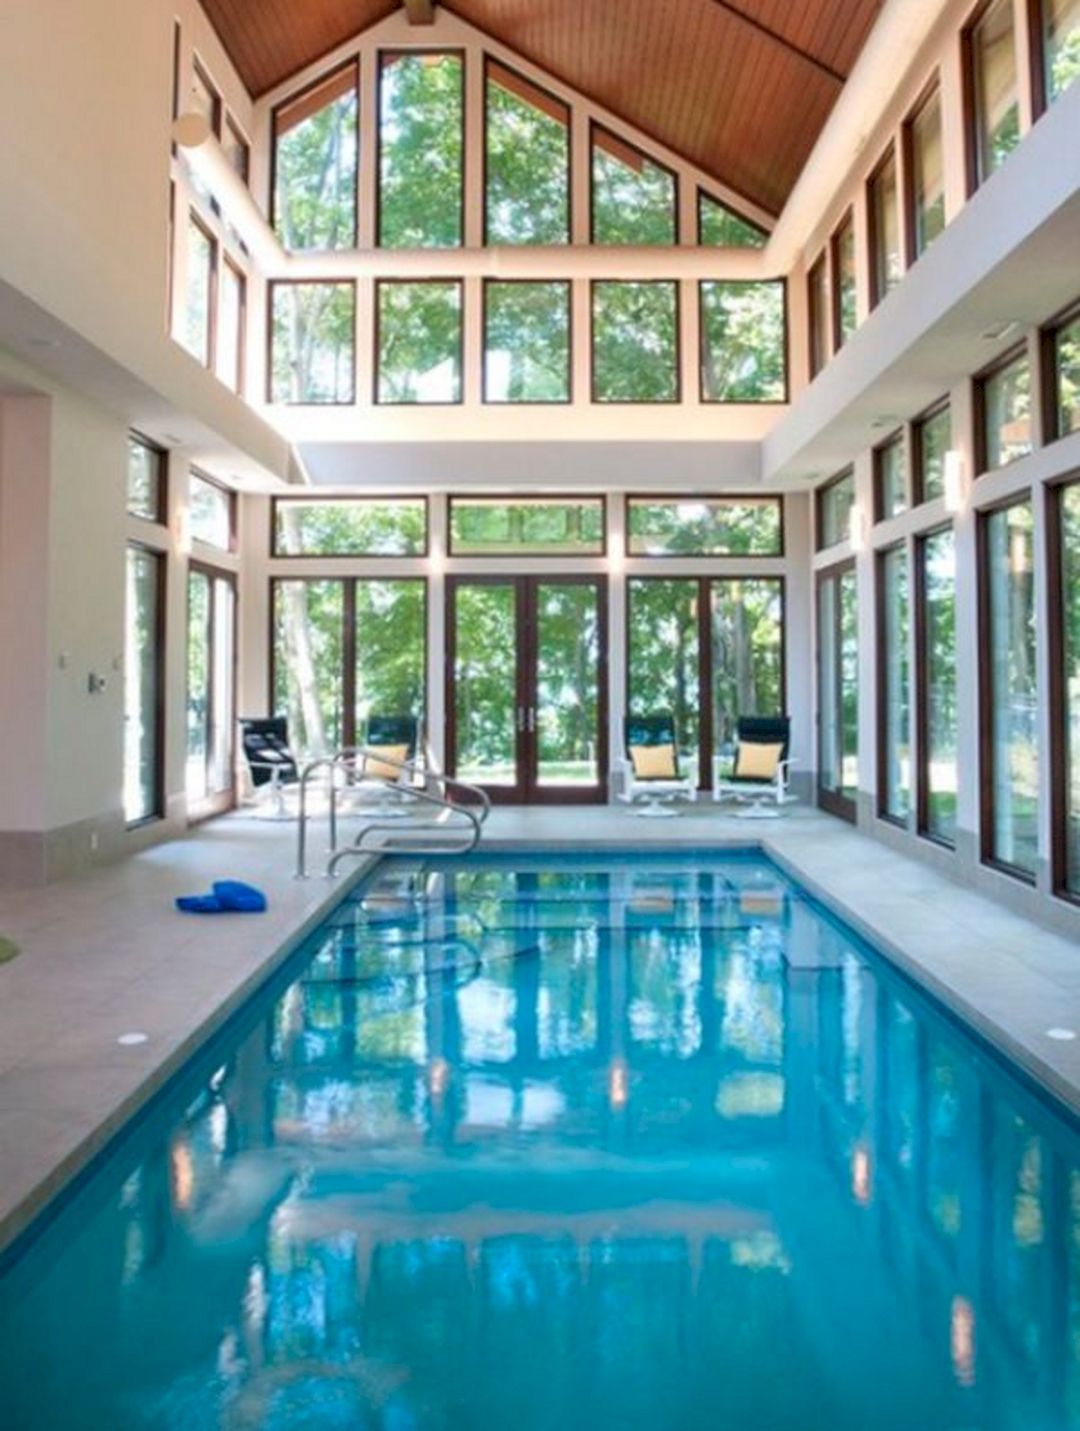  Home Indoor Pool for Small Space